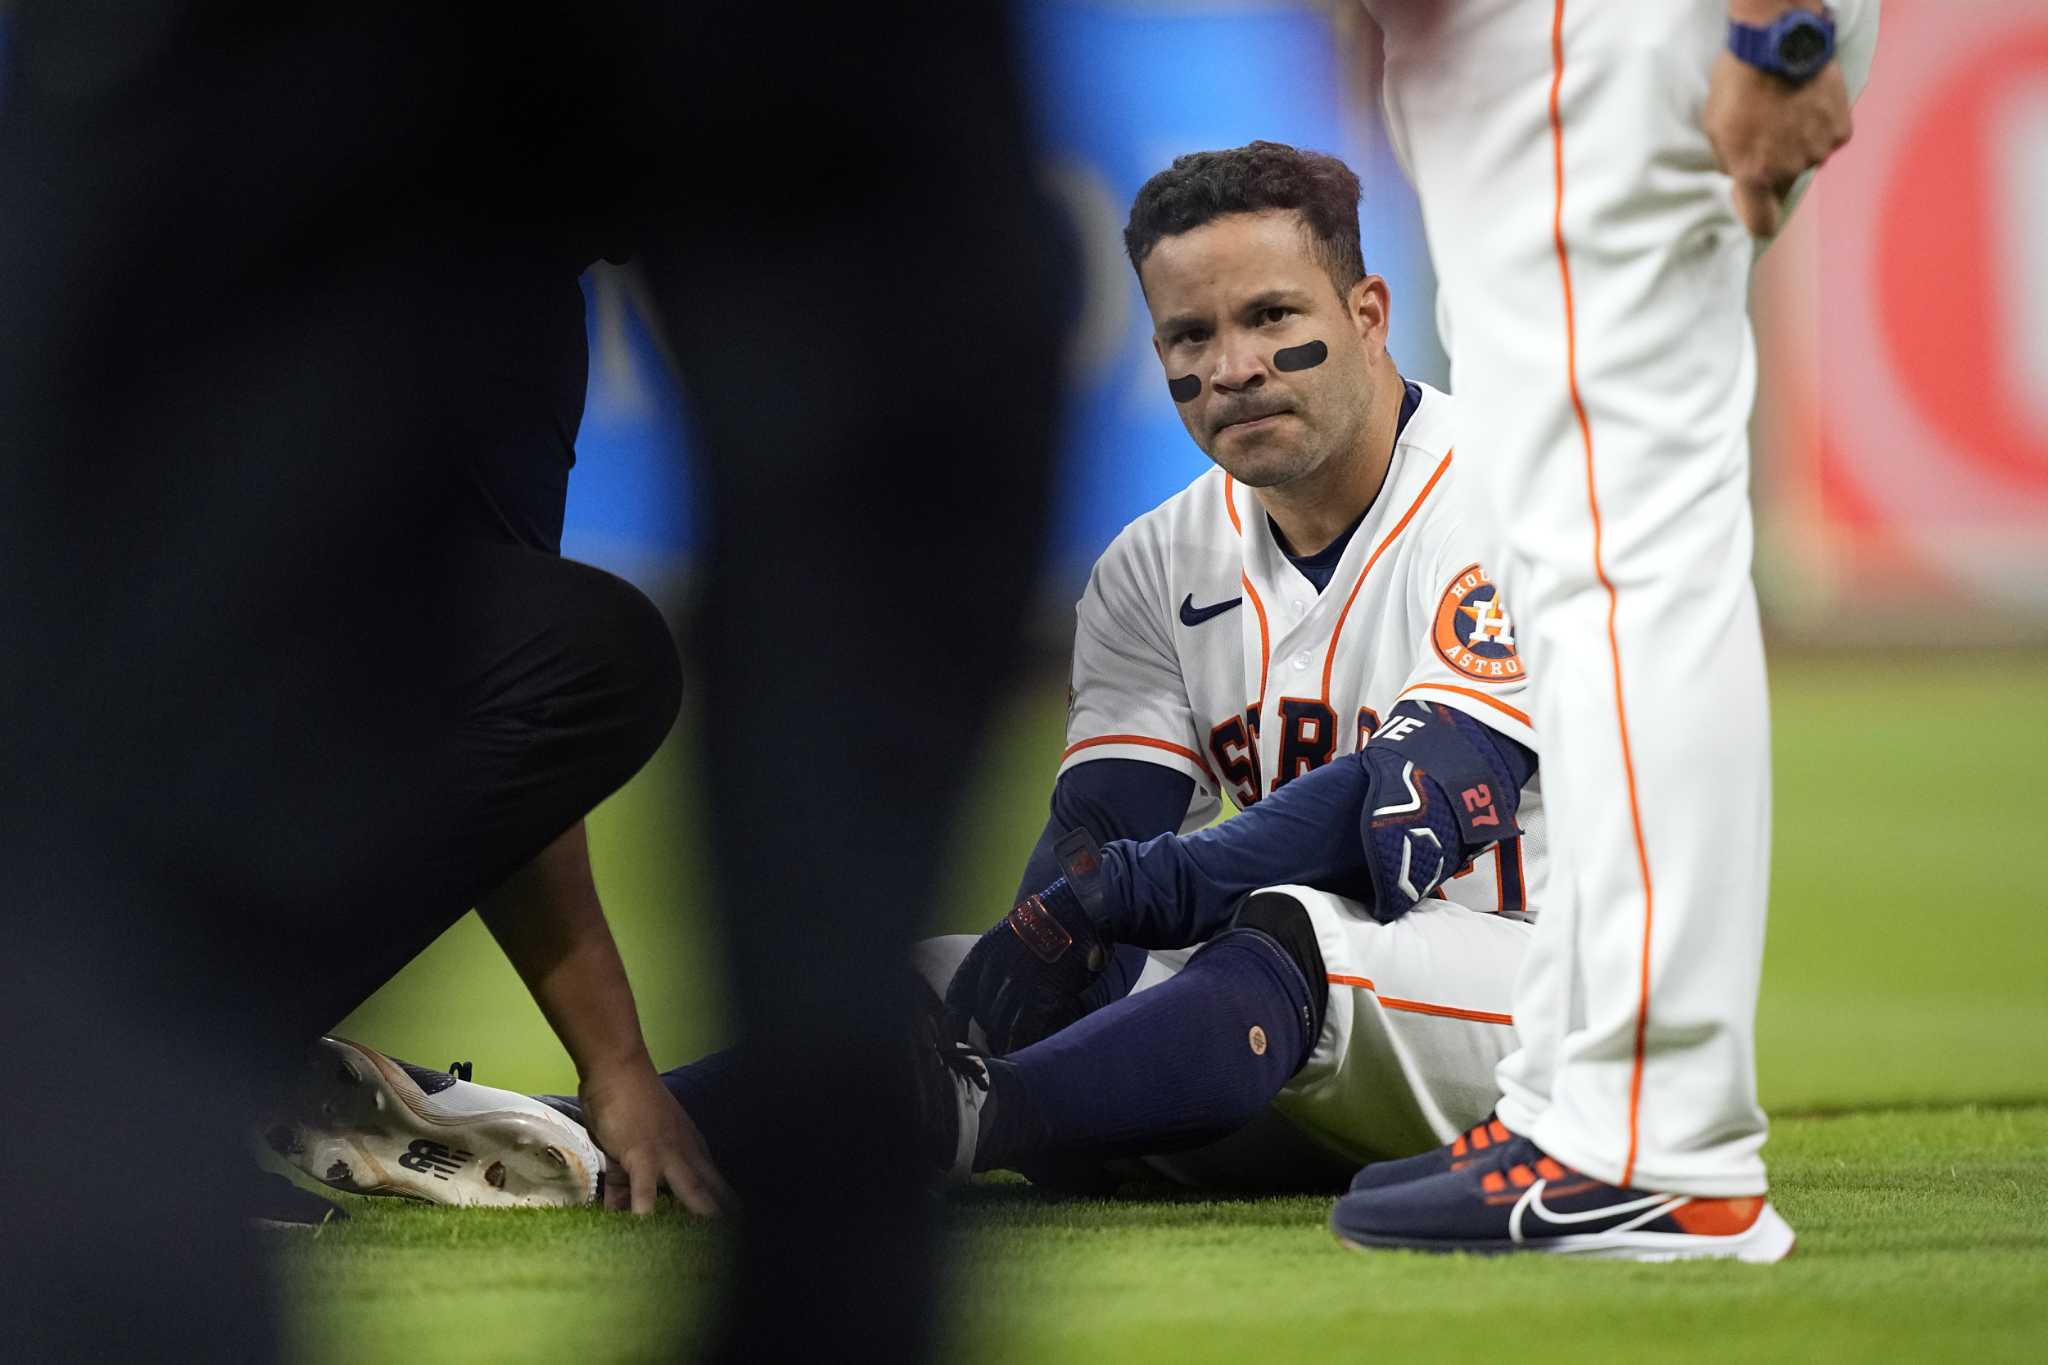 Jose Altuve injury: Astros 2B out indefinitely due to broken thumb